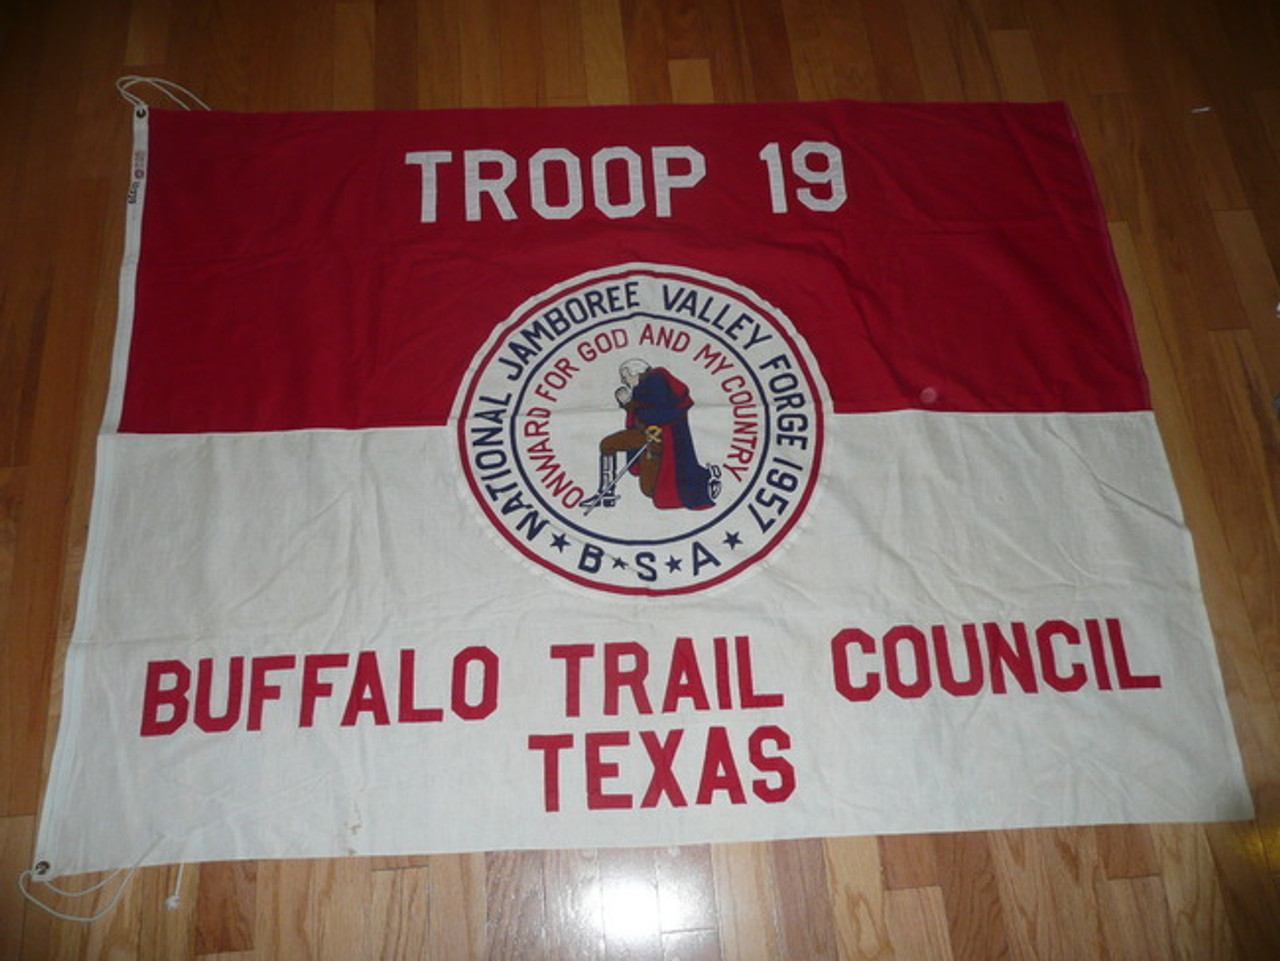 1957 National Jamboree Troop 19, of the Buffalo Trail Council, Troop Flag